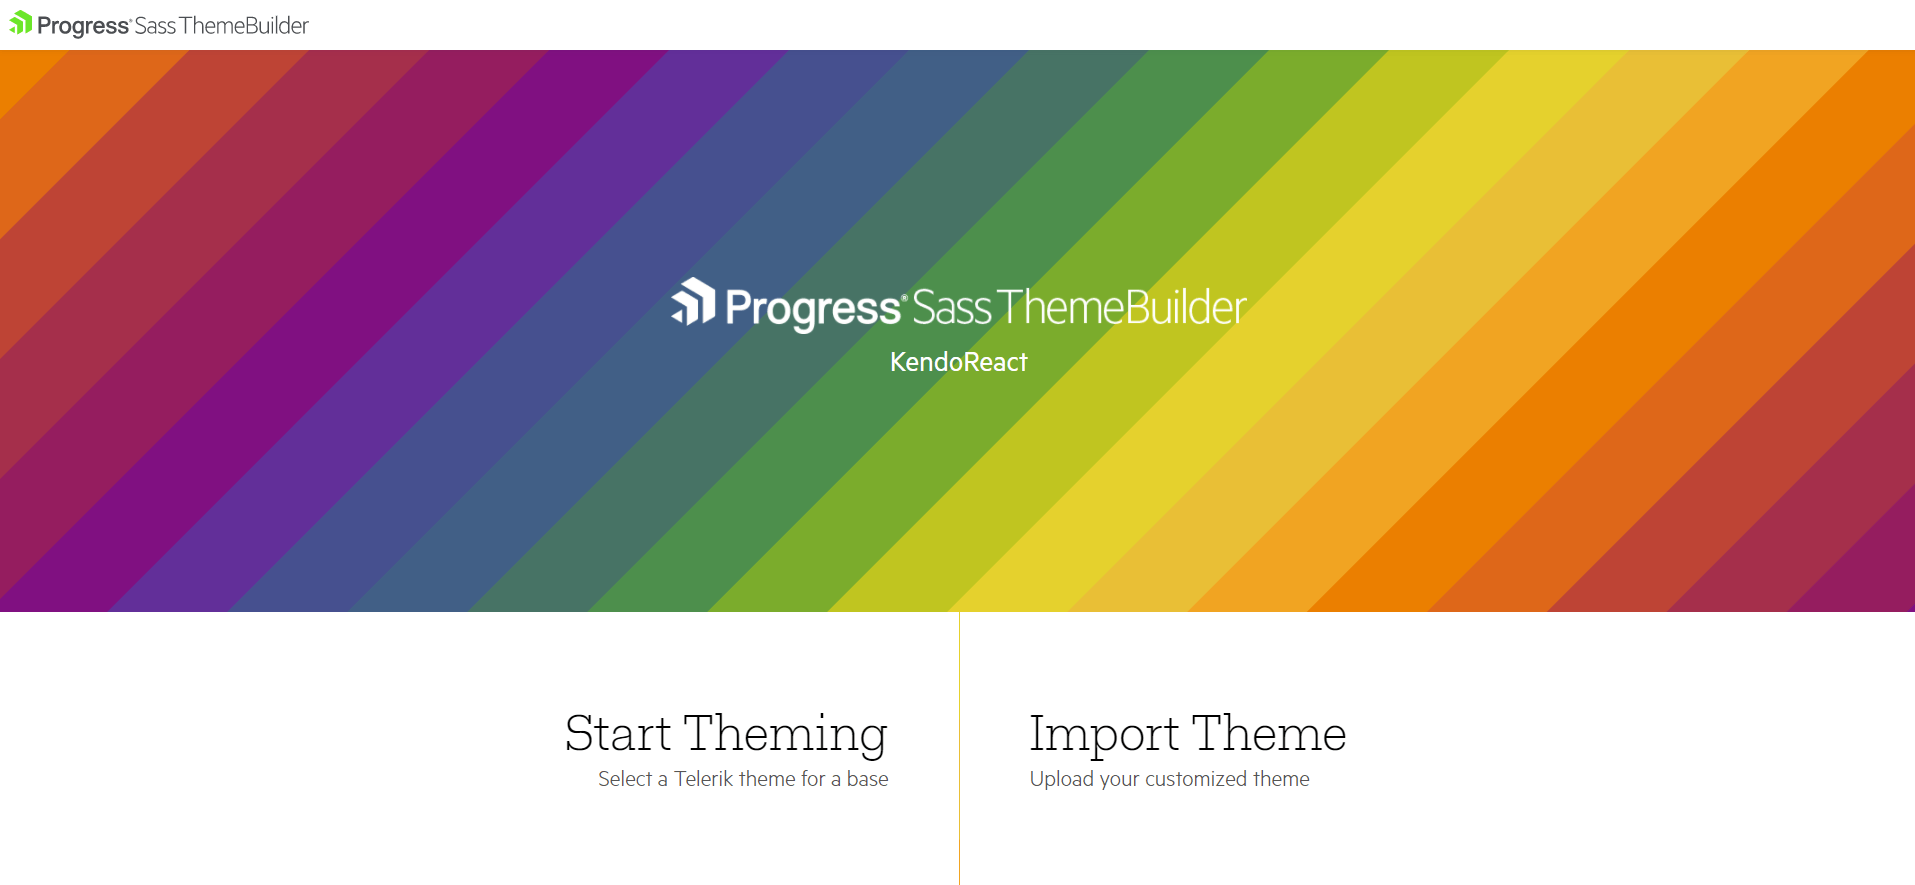 Progress ThemeBuilder page. We're in KendoReact, with options to Start Theming (select a Telerik them for a base) or to Import Theme (Upload your customized theme).